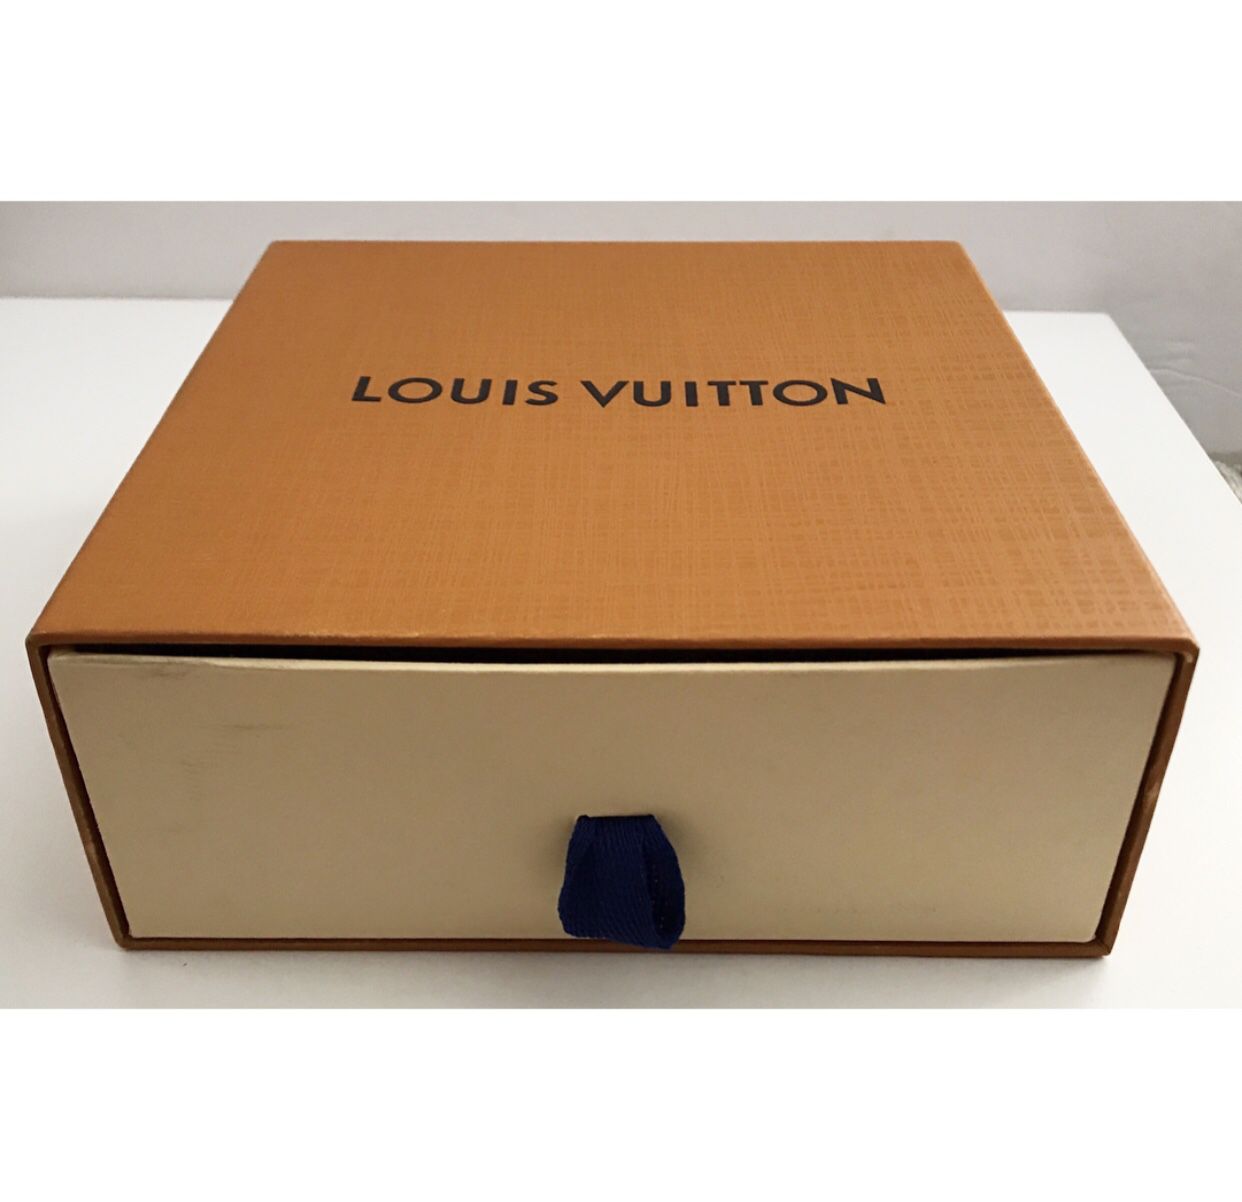 Louis vuitton Shoe Box And Gift Bag for Sale in Newport Beach, CA - OfferUp